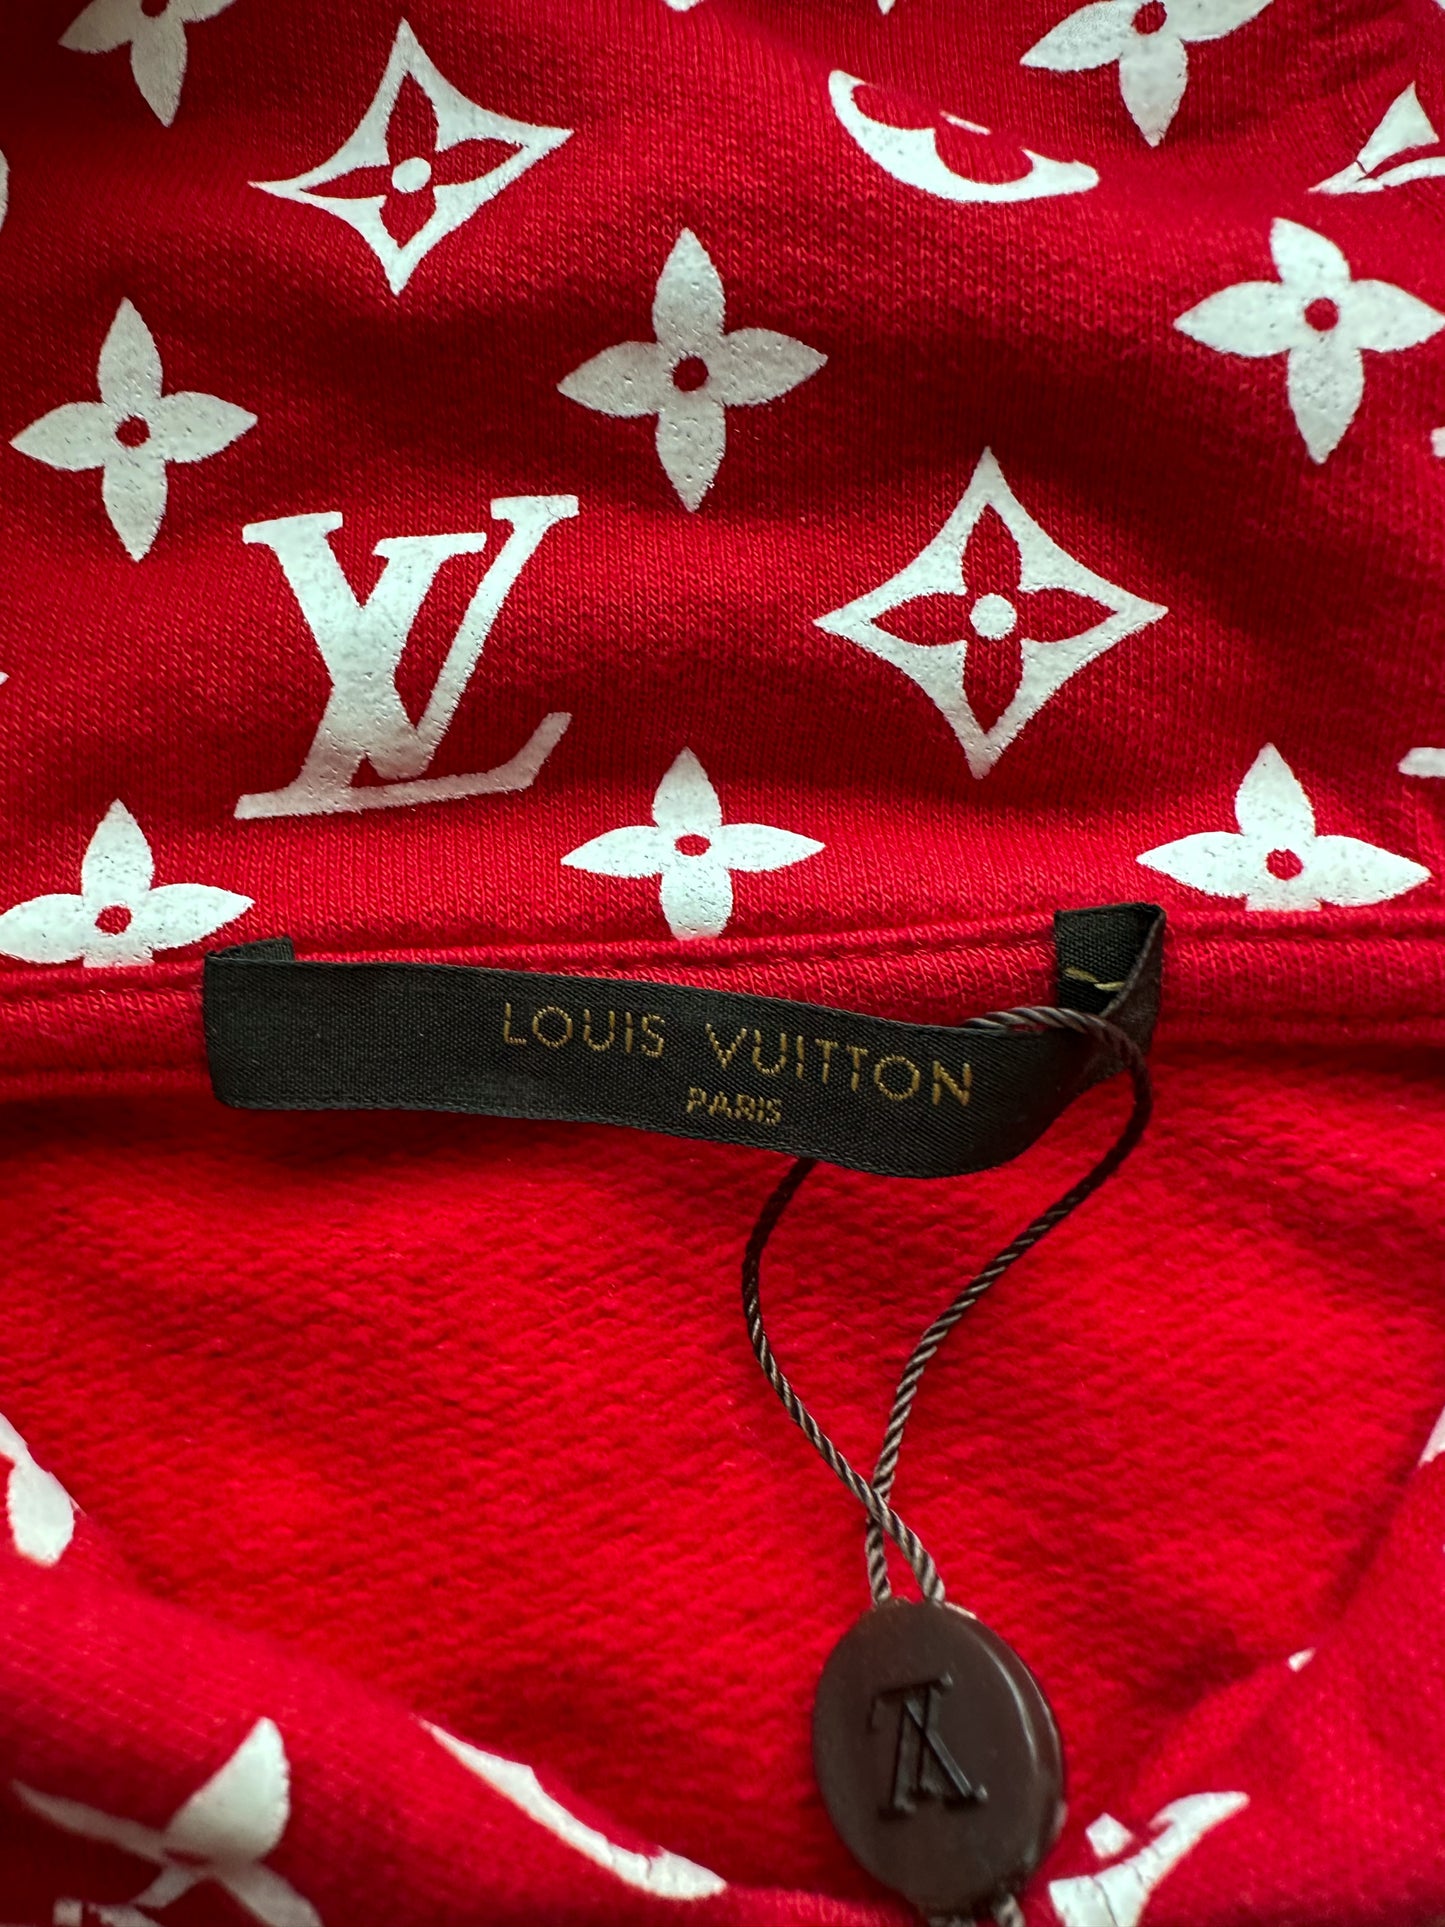 Buy Supreme LOUIS VUITTON 17AW LV Box Logo Hooded Sweatshirt Box Logo Pullover  Hoodie S Red from Japan - Buy authentic Plus exclusive items from Japan